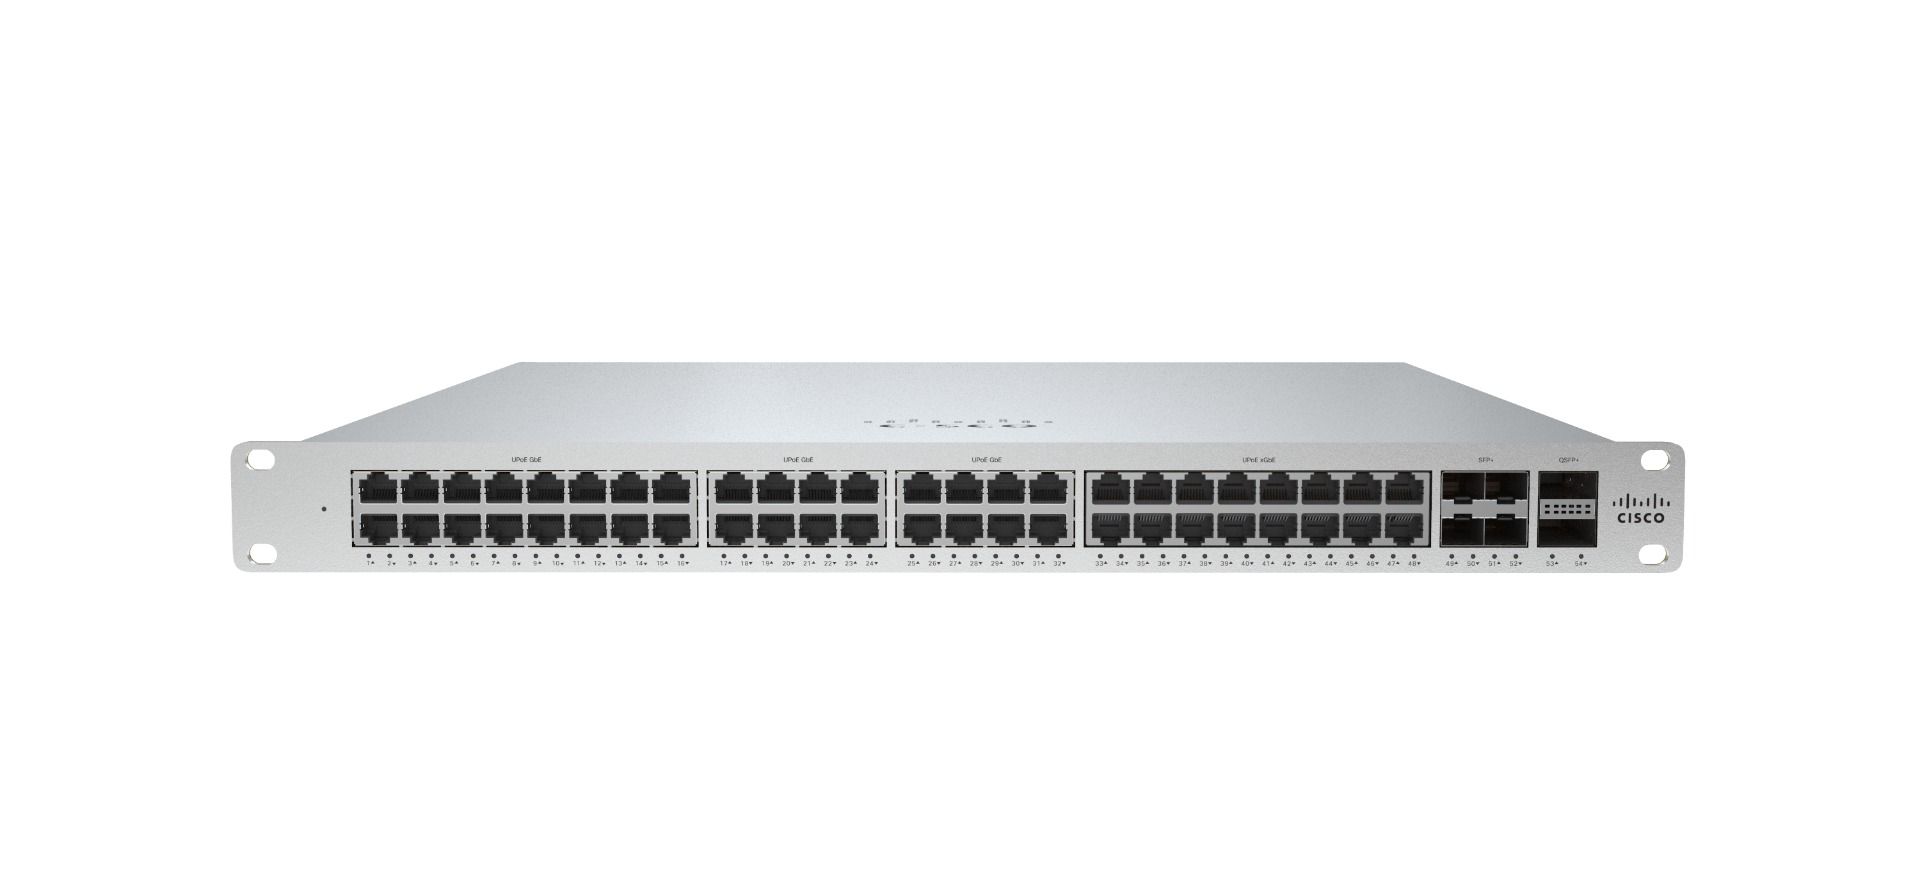 Shop Discounted Firewalls from Top Brands 